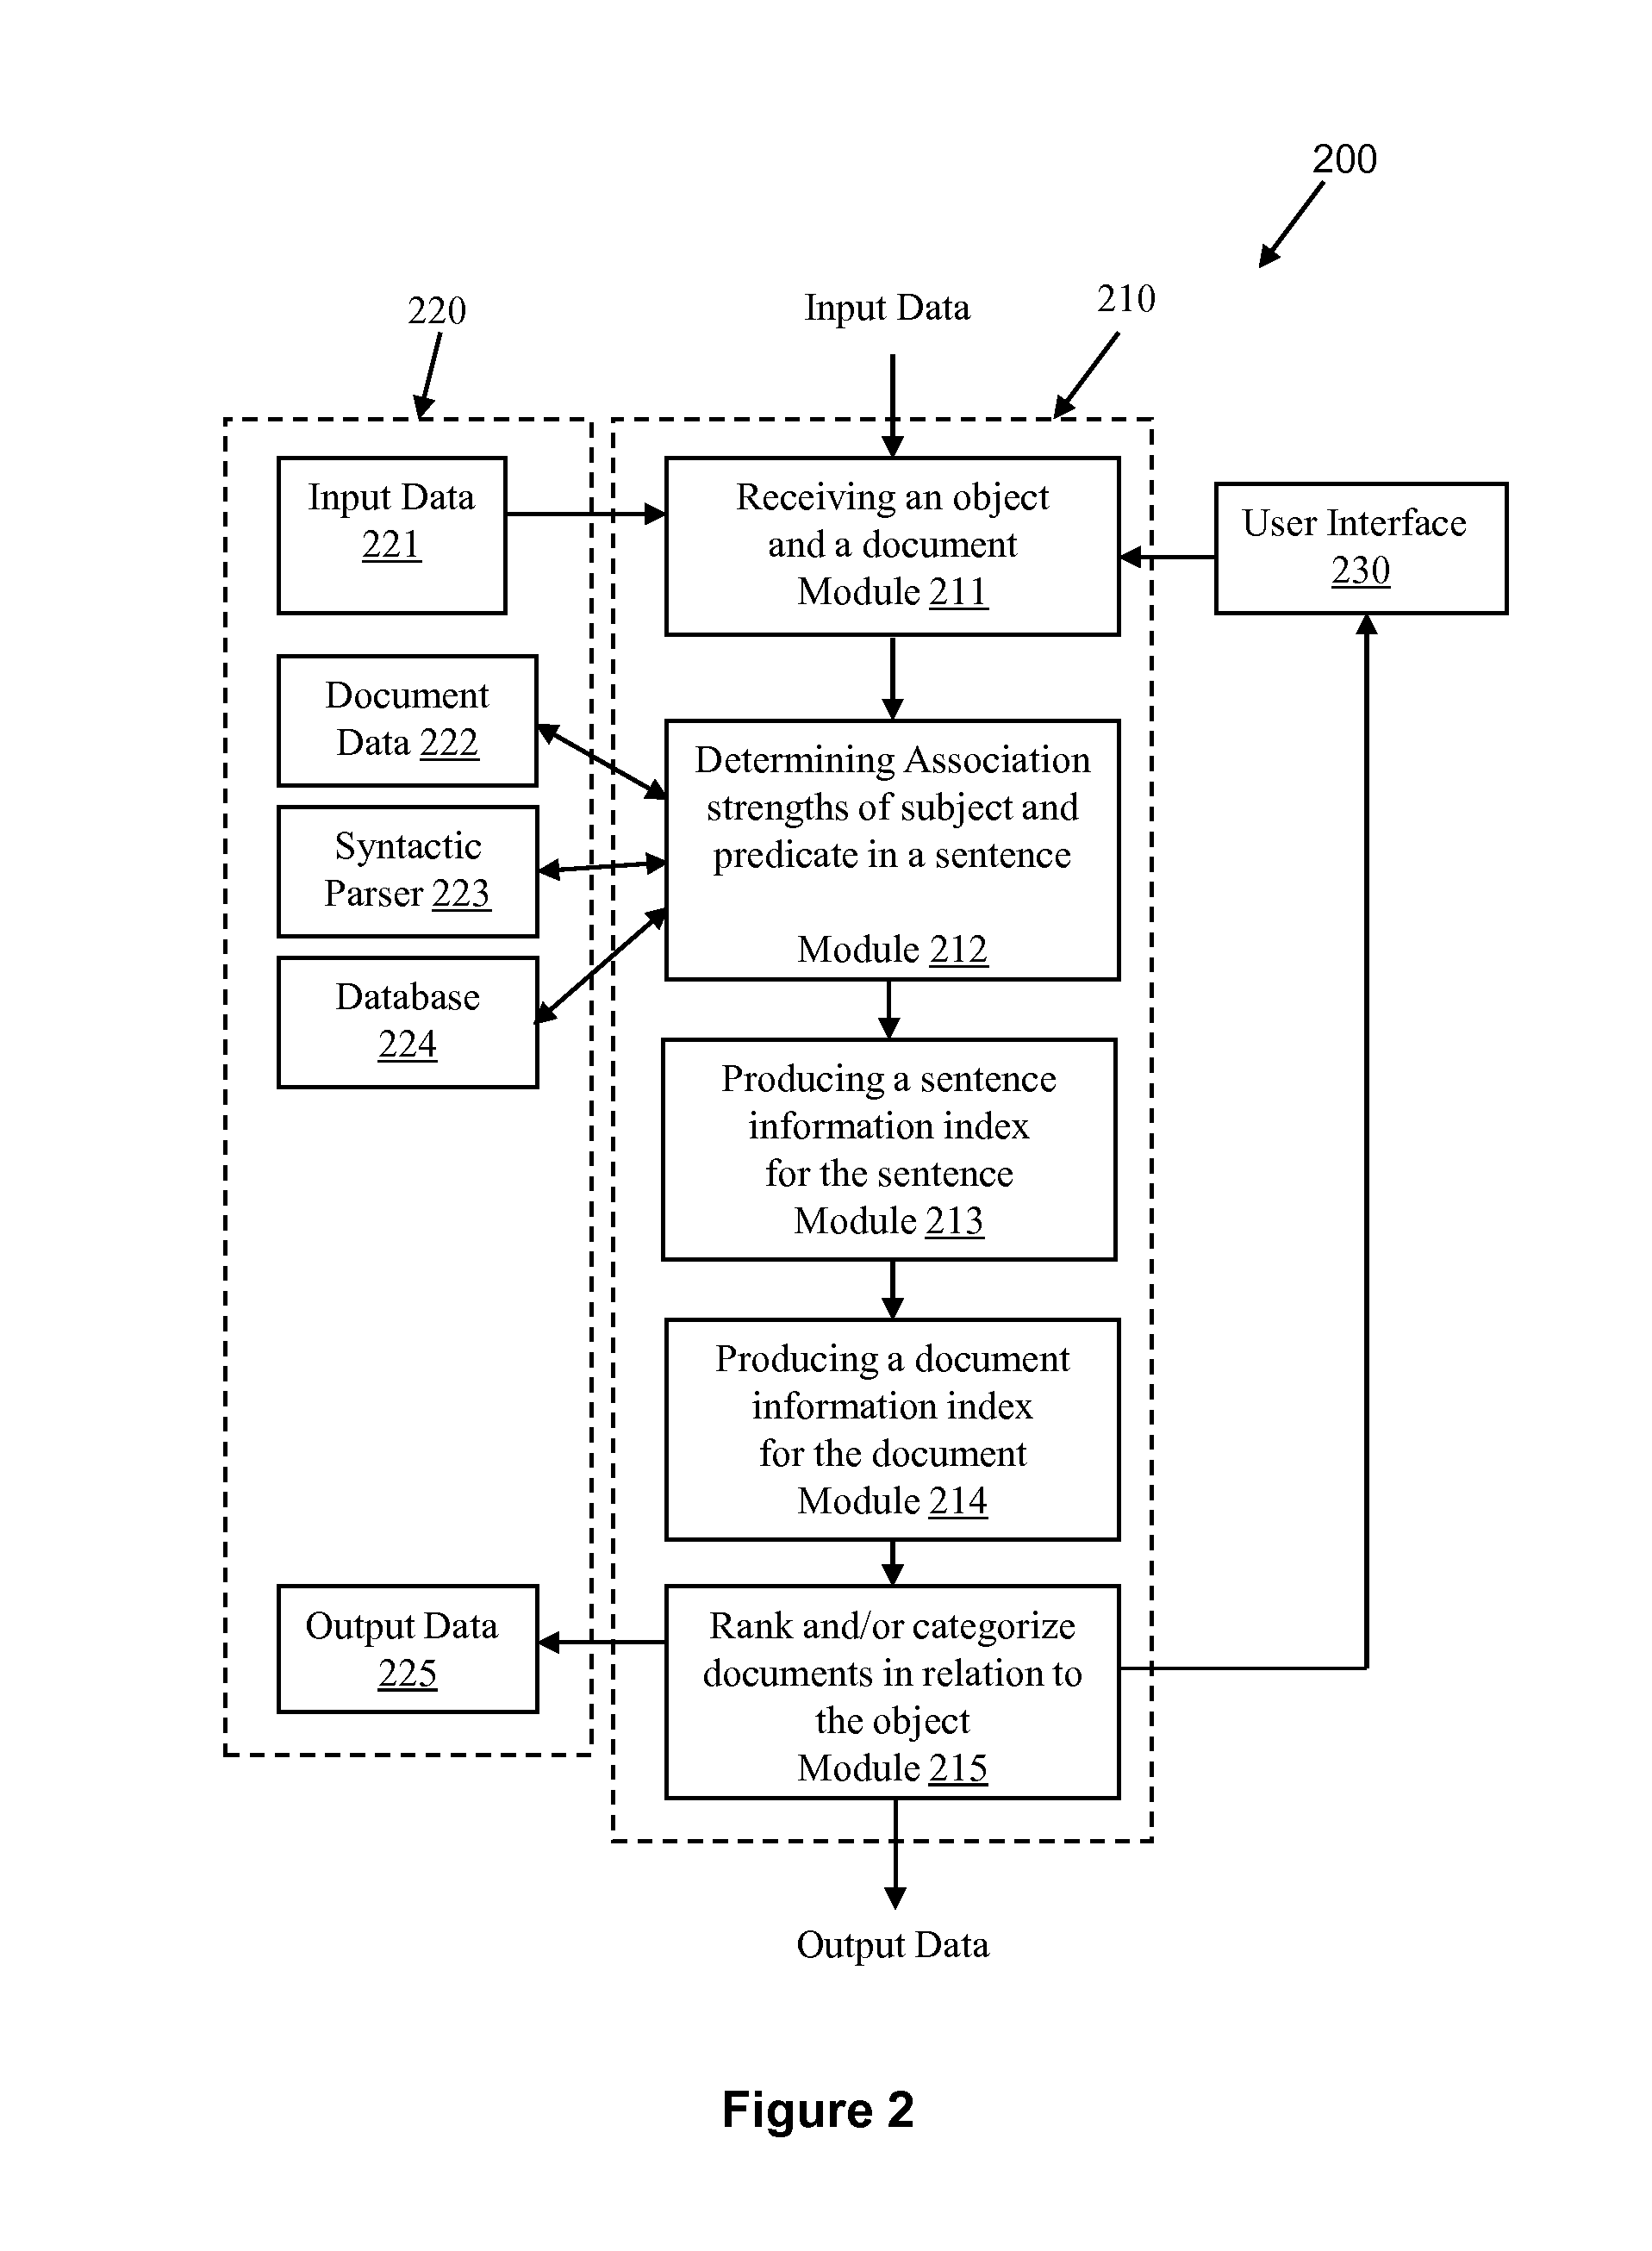 System and methods for quantitative assessment of information in natural language contents and for determining relevance using association data